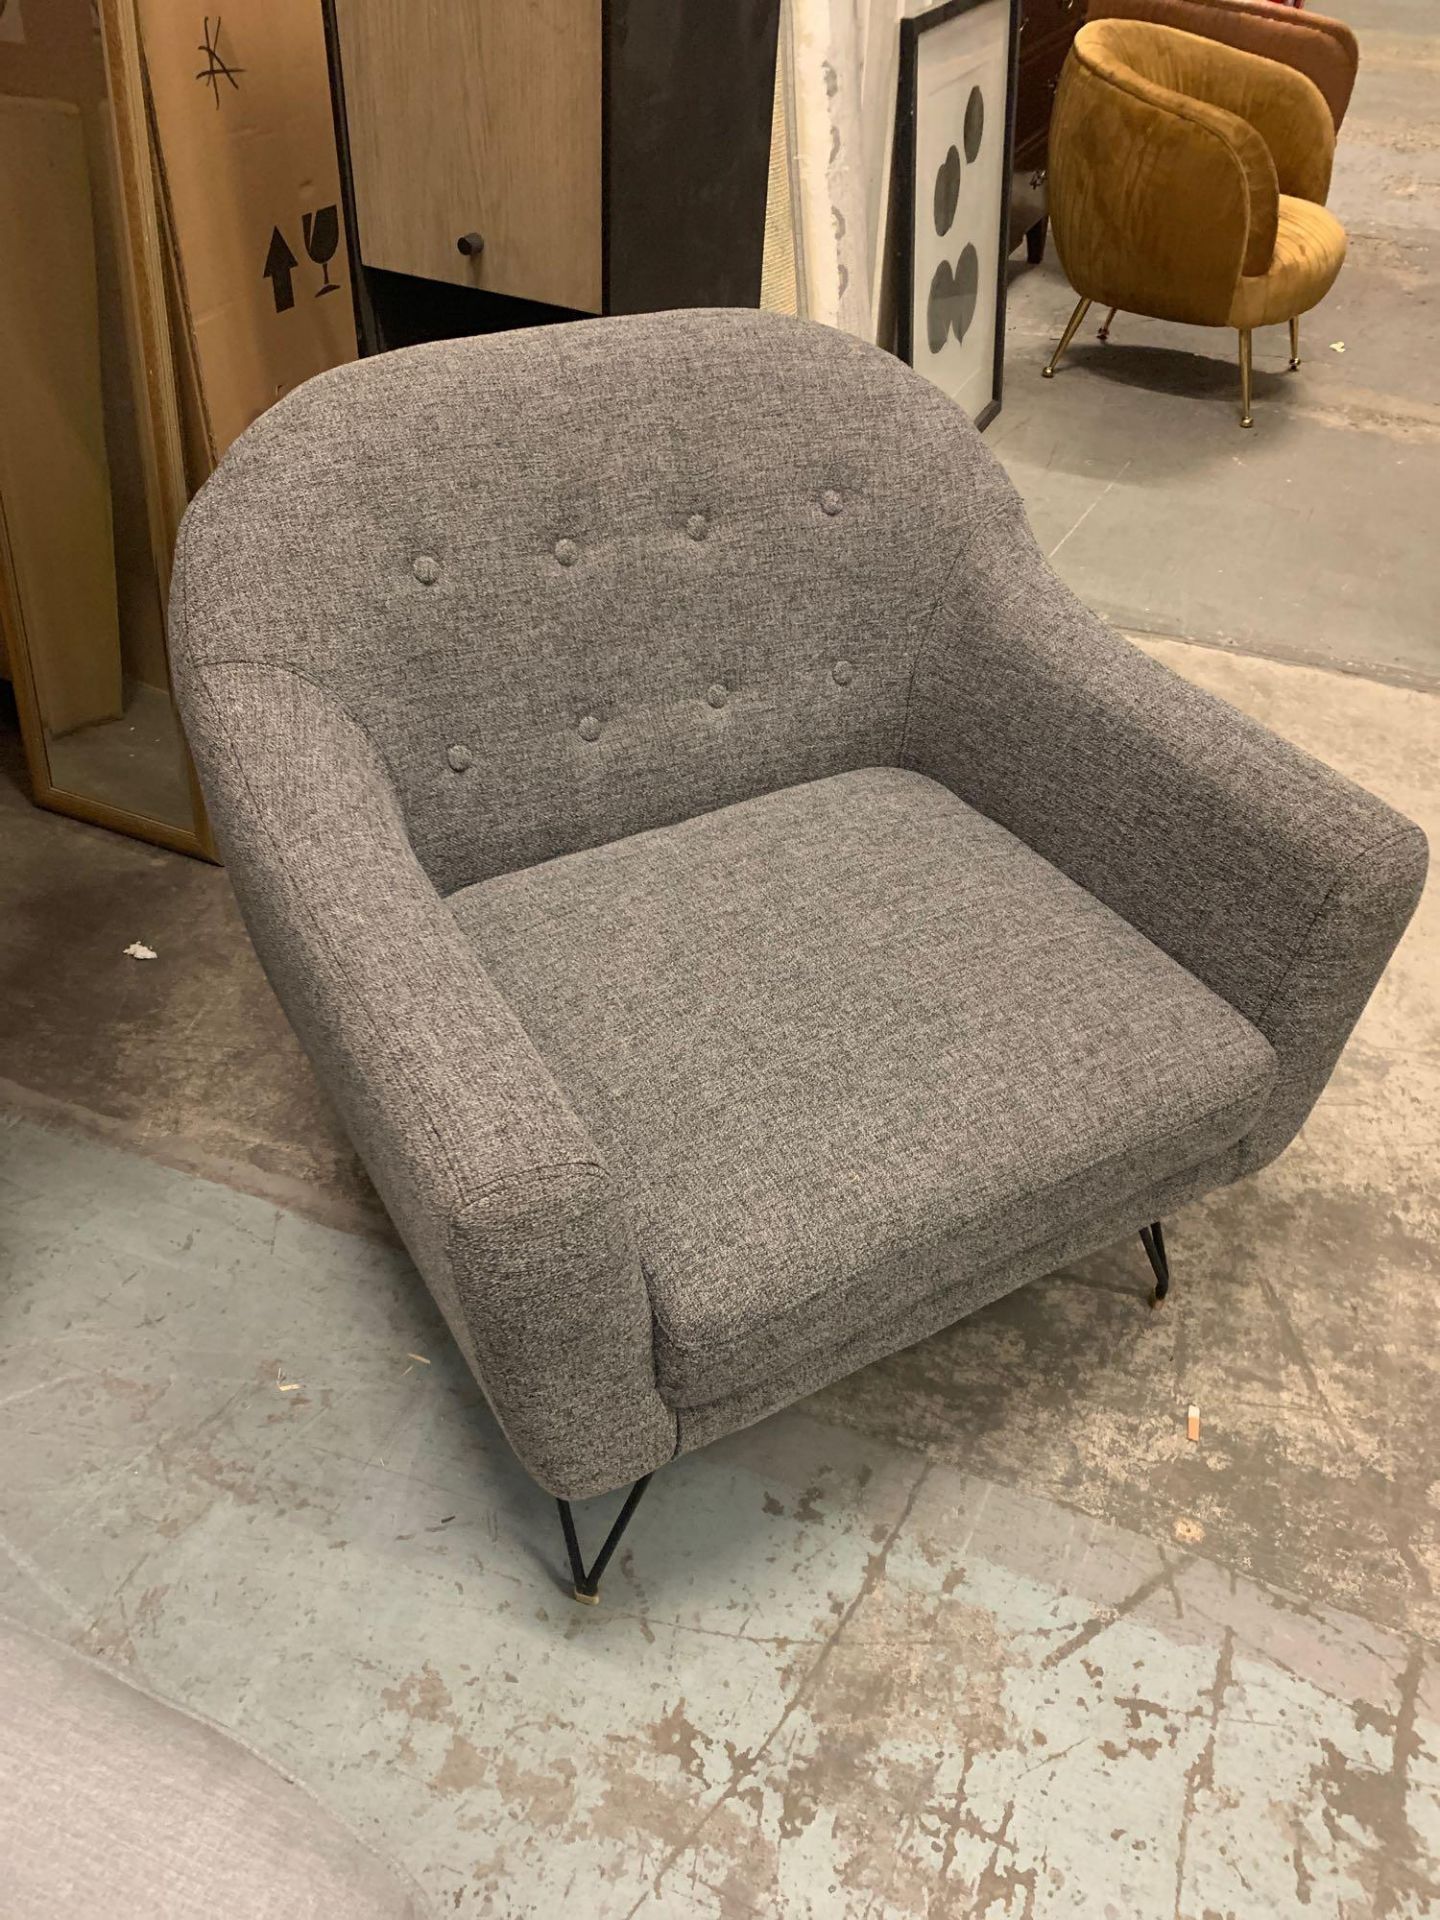 Volda Armchair Space Grey The Volda Armchair In Space Grey Is A Retro-Inspired Chair That Adds A - Bild 3 aus 4